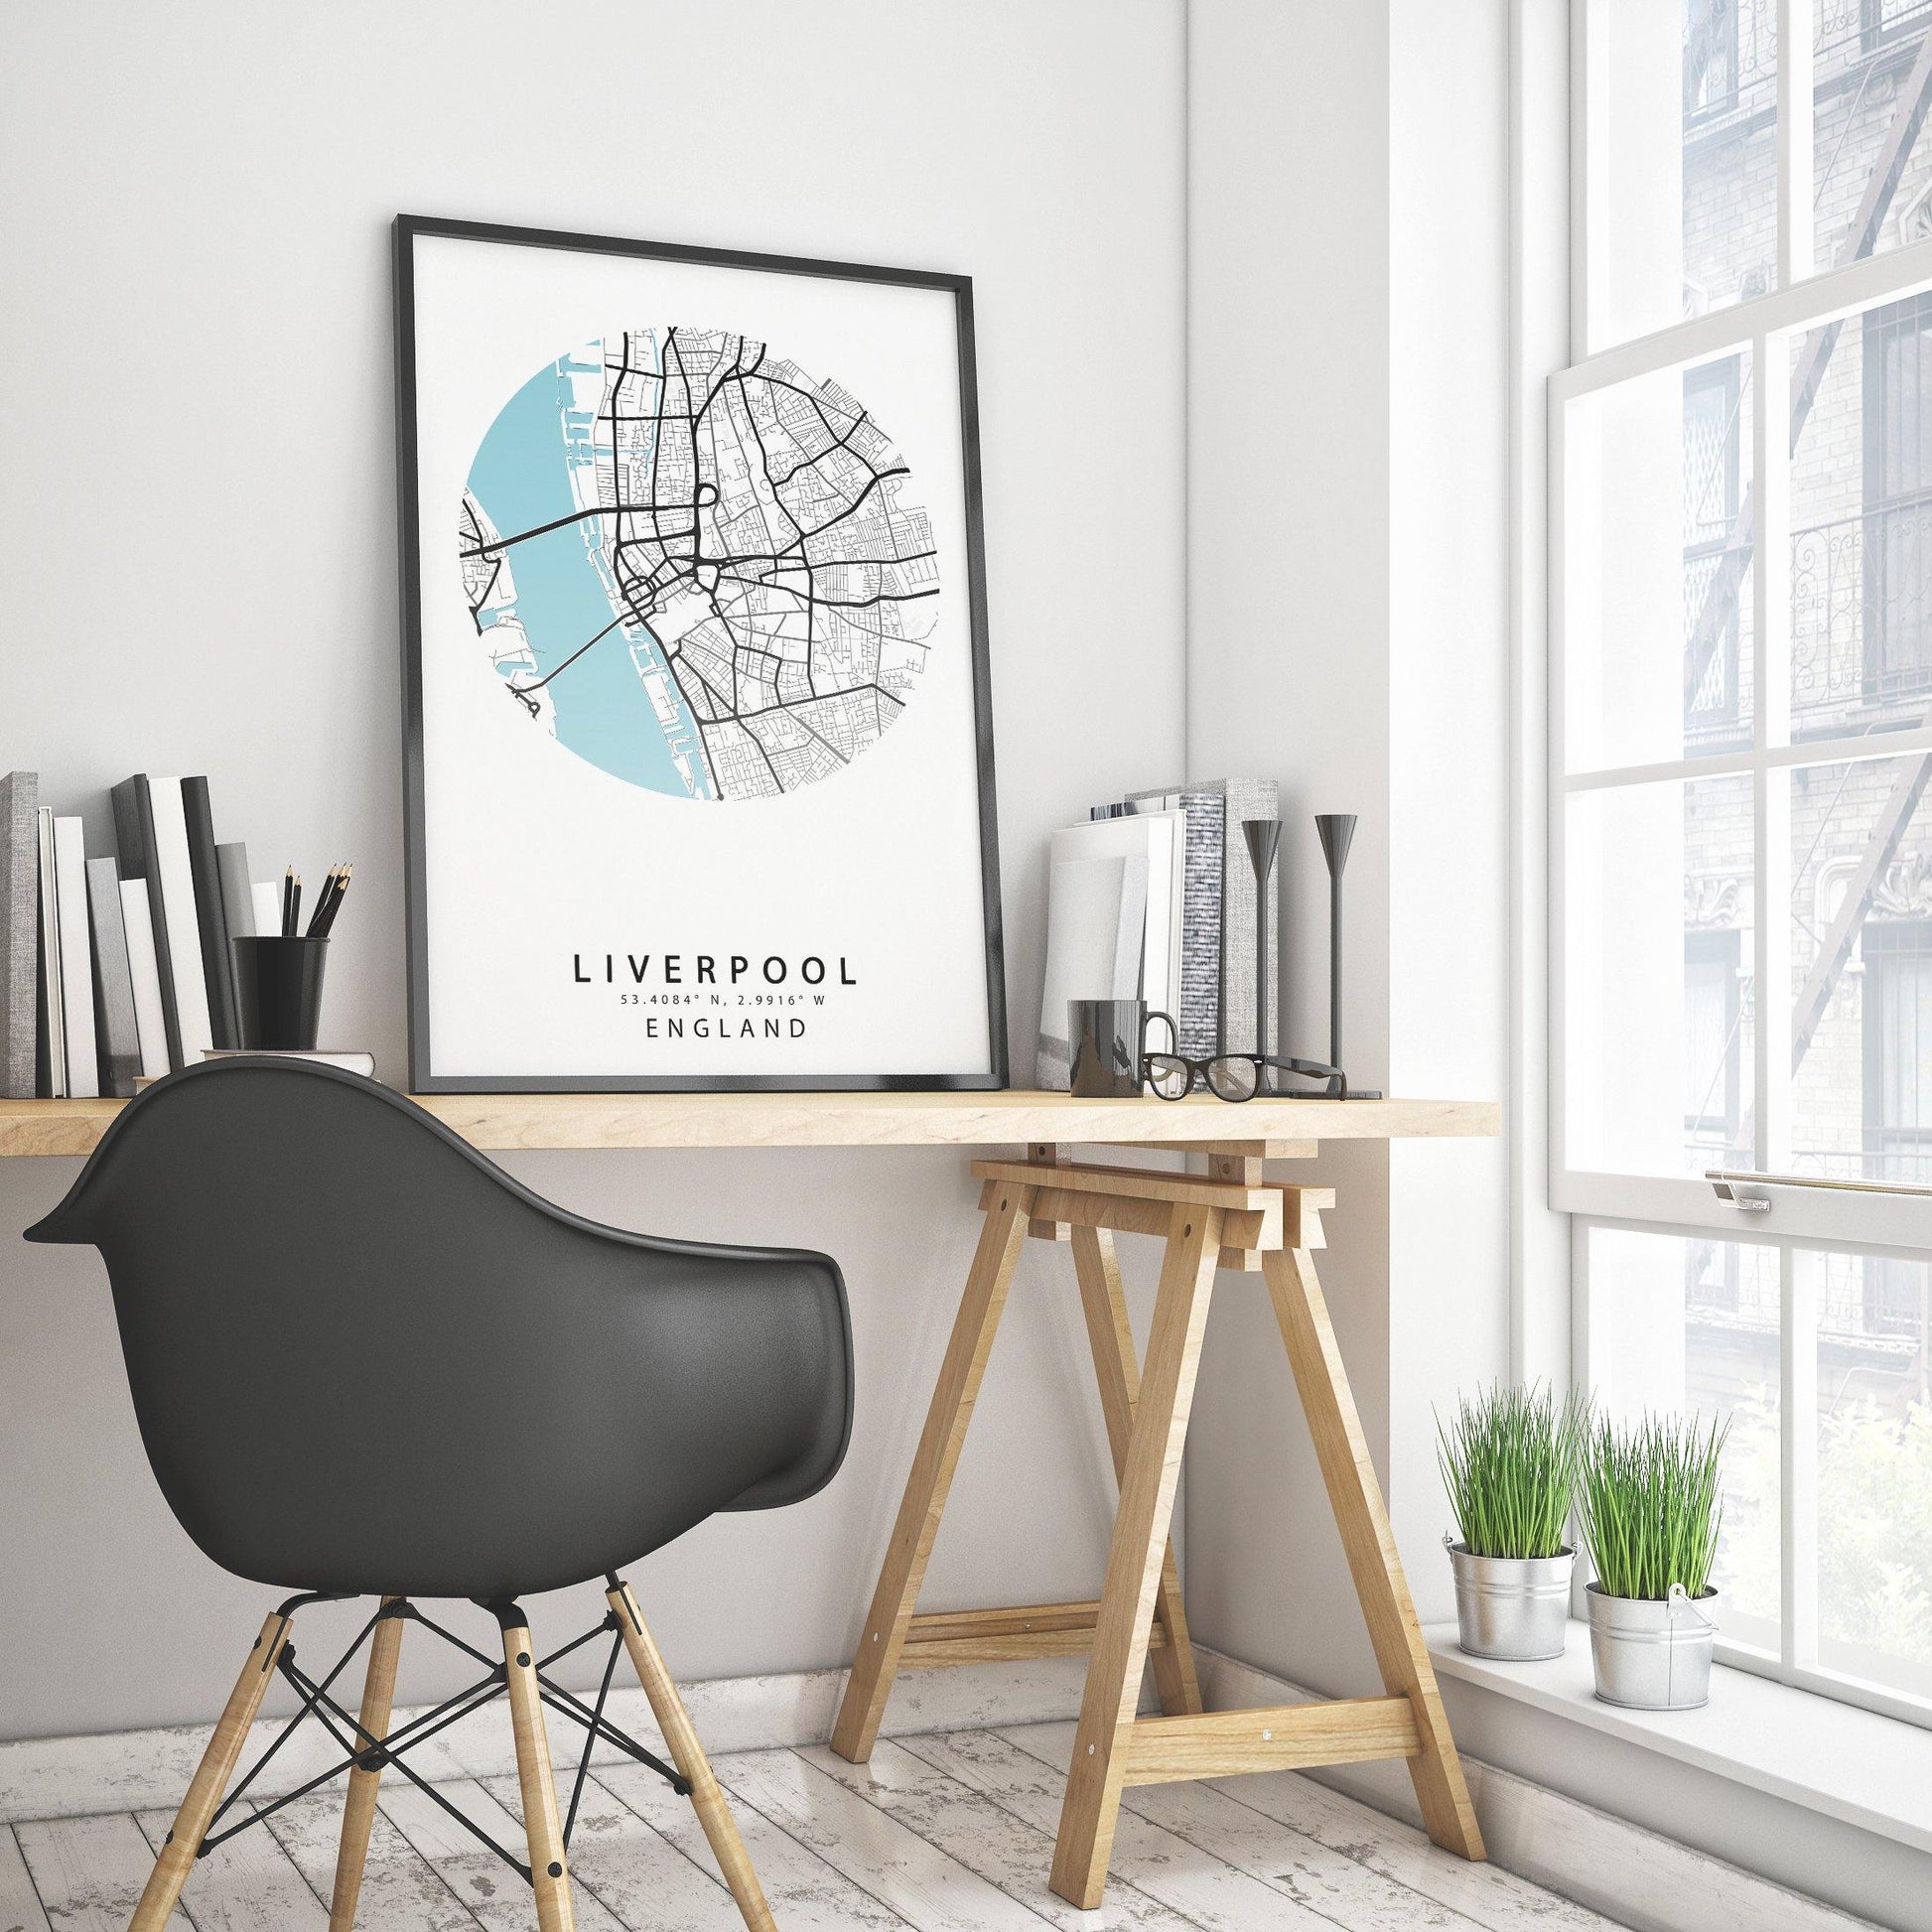 LIVERPOOL City Map Print | Liverpool Street Map Road | England Poster Art | Liverpool Wall Art | Variety Sizes - 98types